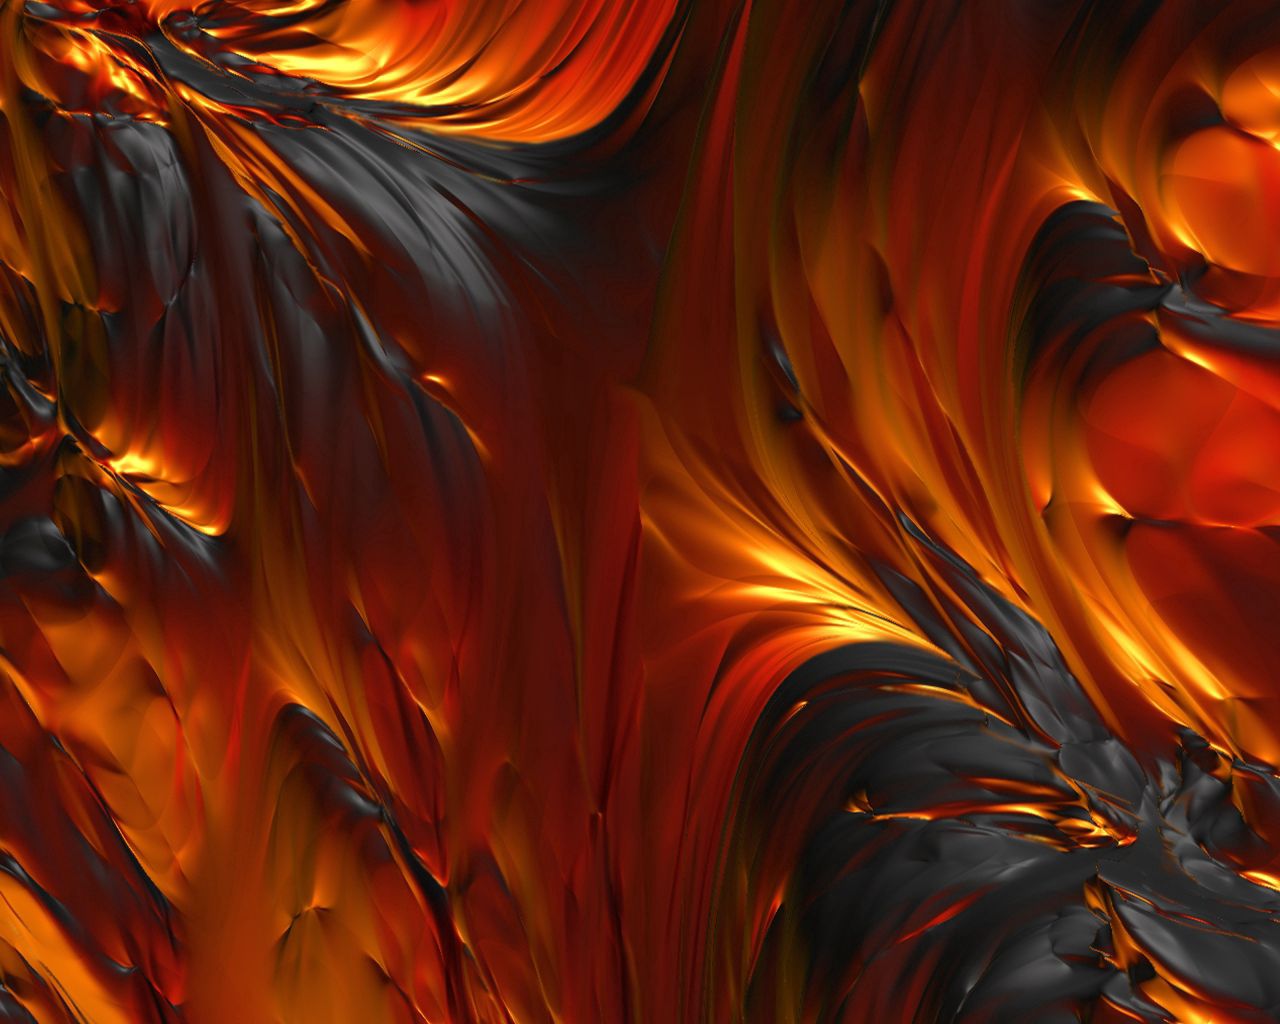 paints, abstract, fire, blurred, greased, butter, oil lock screen backgrounds